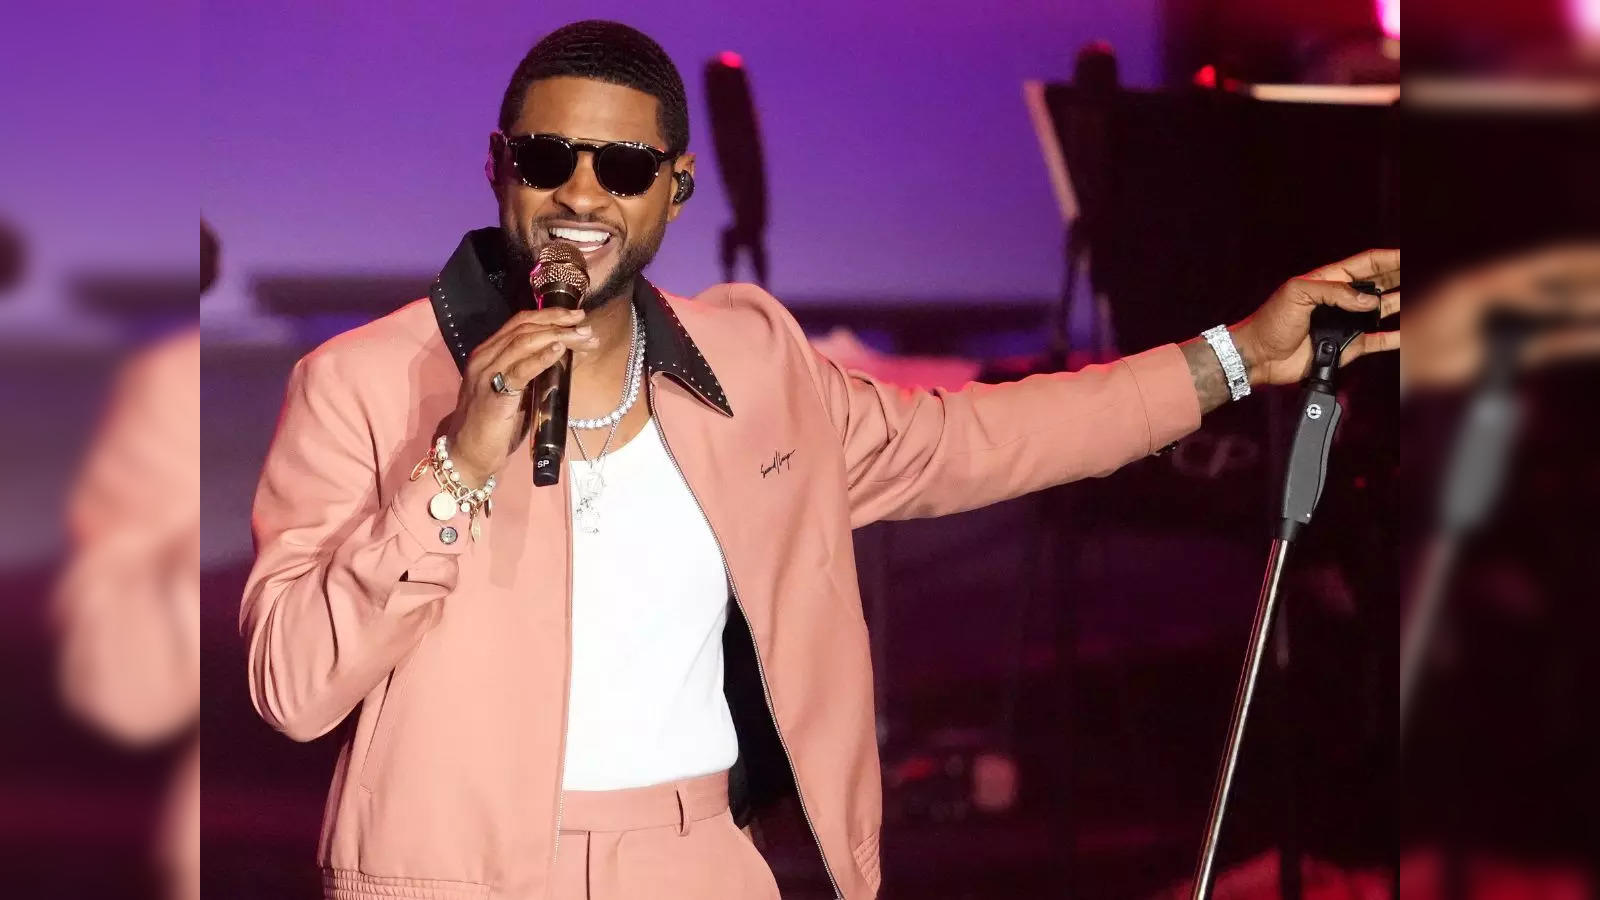 Teary-eyed Usher takes a bow at final Las Vegas residency